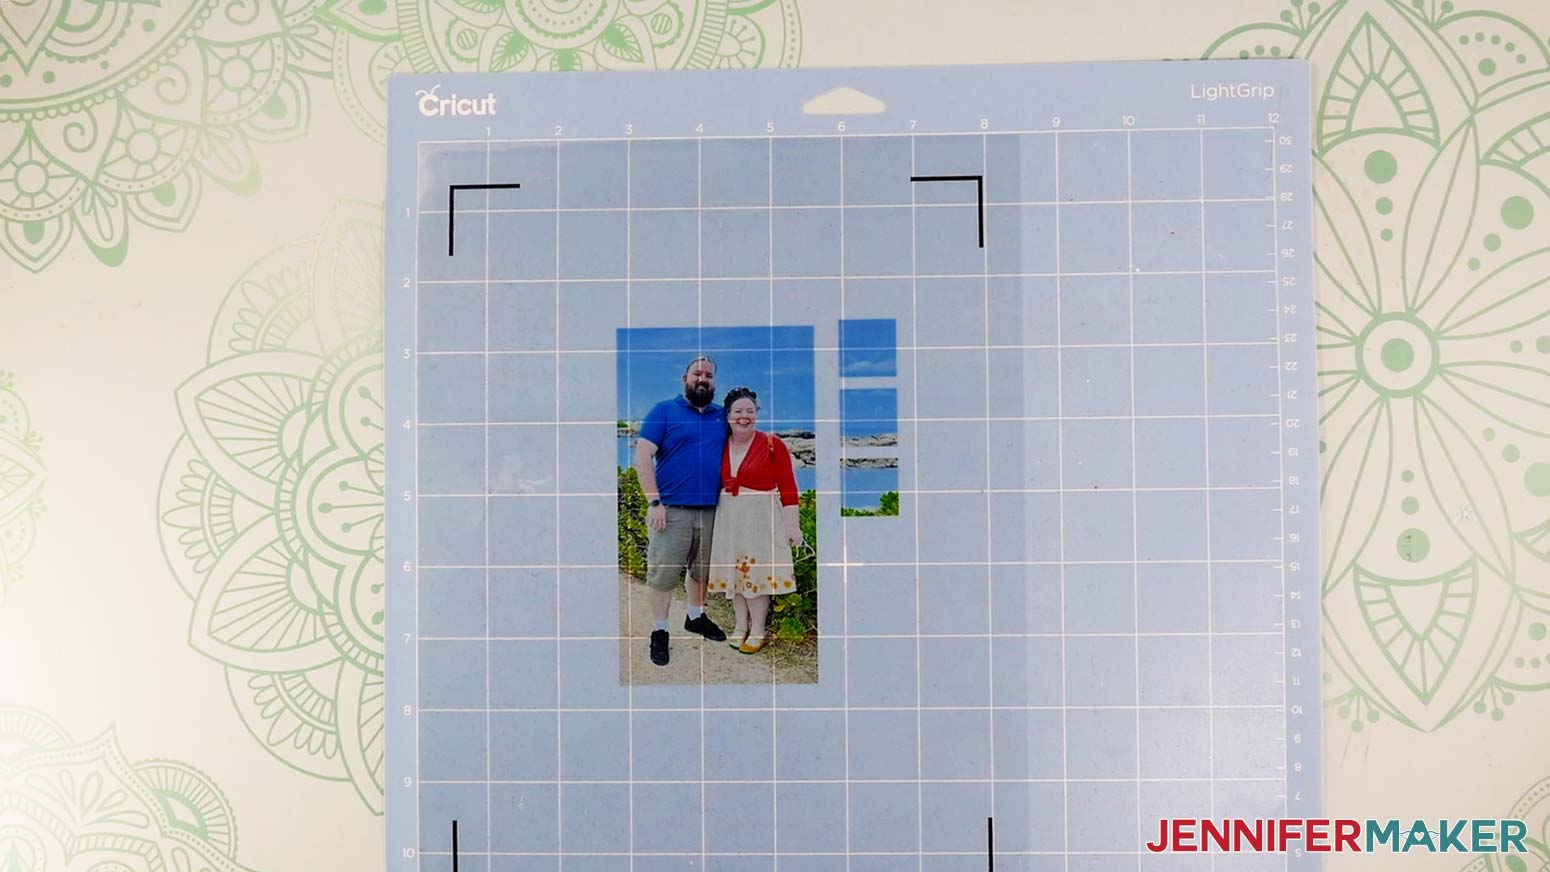 Printed photo of Jennifer and Greg for the light painting shadow box project correctly positioned on a blue LightGrip machine mat